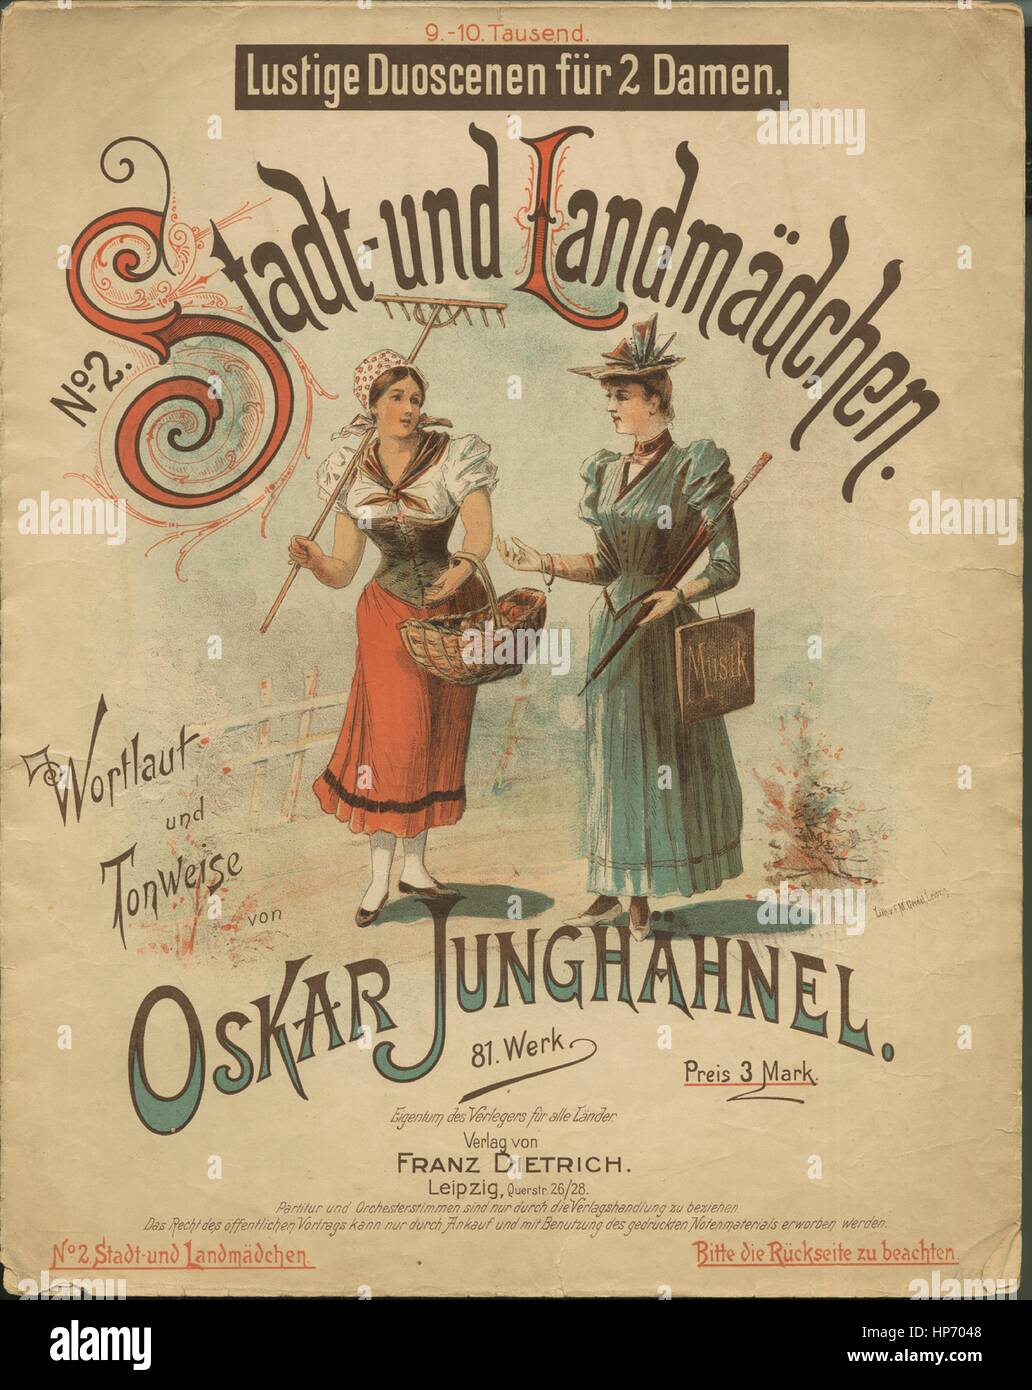 Sheet music cover image of the song 'No 2 Stadt-und Landmadchen Lustige Duoscenen fur 2 Damen', with original authorship notes reading 'Wortlaut und tonweise von Oskar Junghahnel', 1900. The publisher is listed as 'Franz Dietrich, Querstr. 26/28', the form of composition is 'sectional', the instrumentation is 'piano and voice', the first line reads 'Herrlich ist's am fruhen Morgan, auf dem Land in Feld und Flur', and the illustration artist is listed as 'Lith. v. F.M. Geidel, Leipzig'. Stock Photo